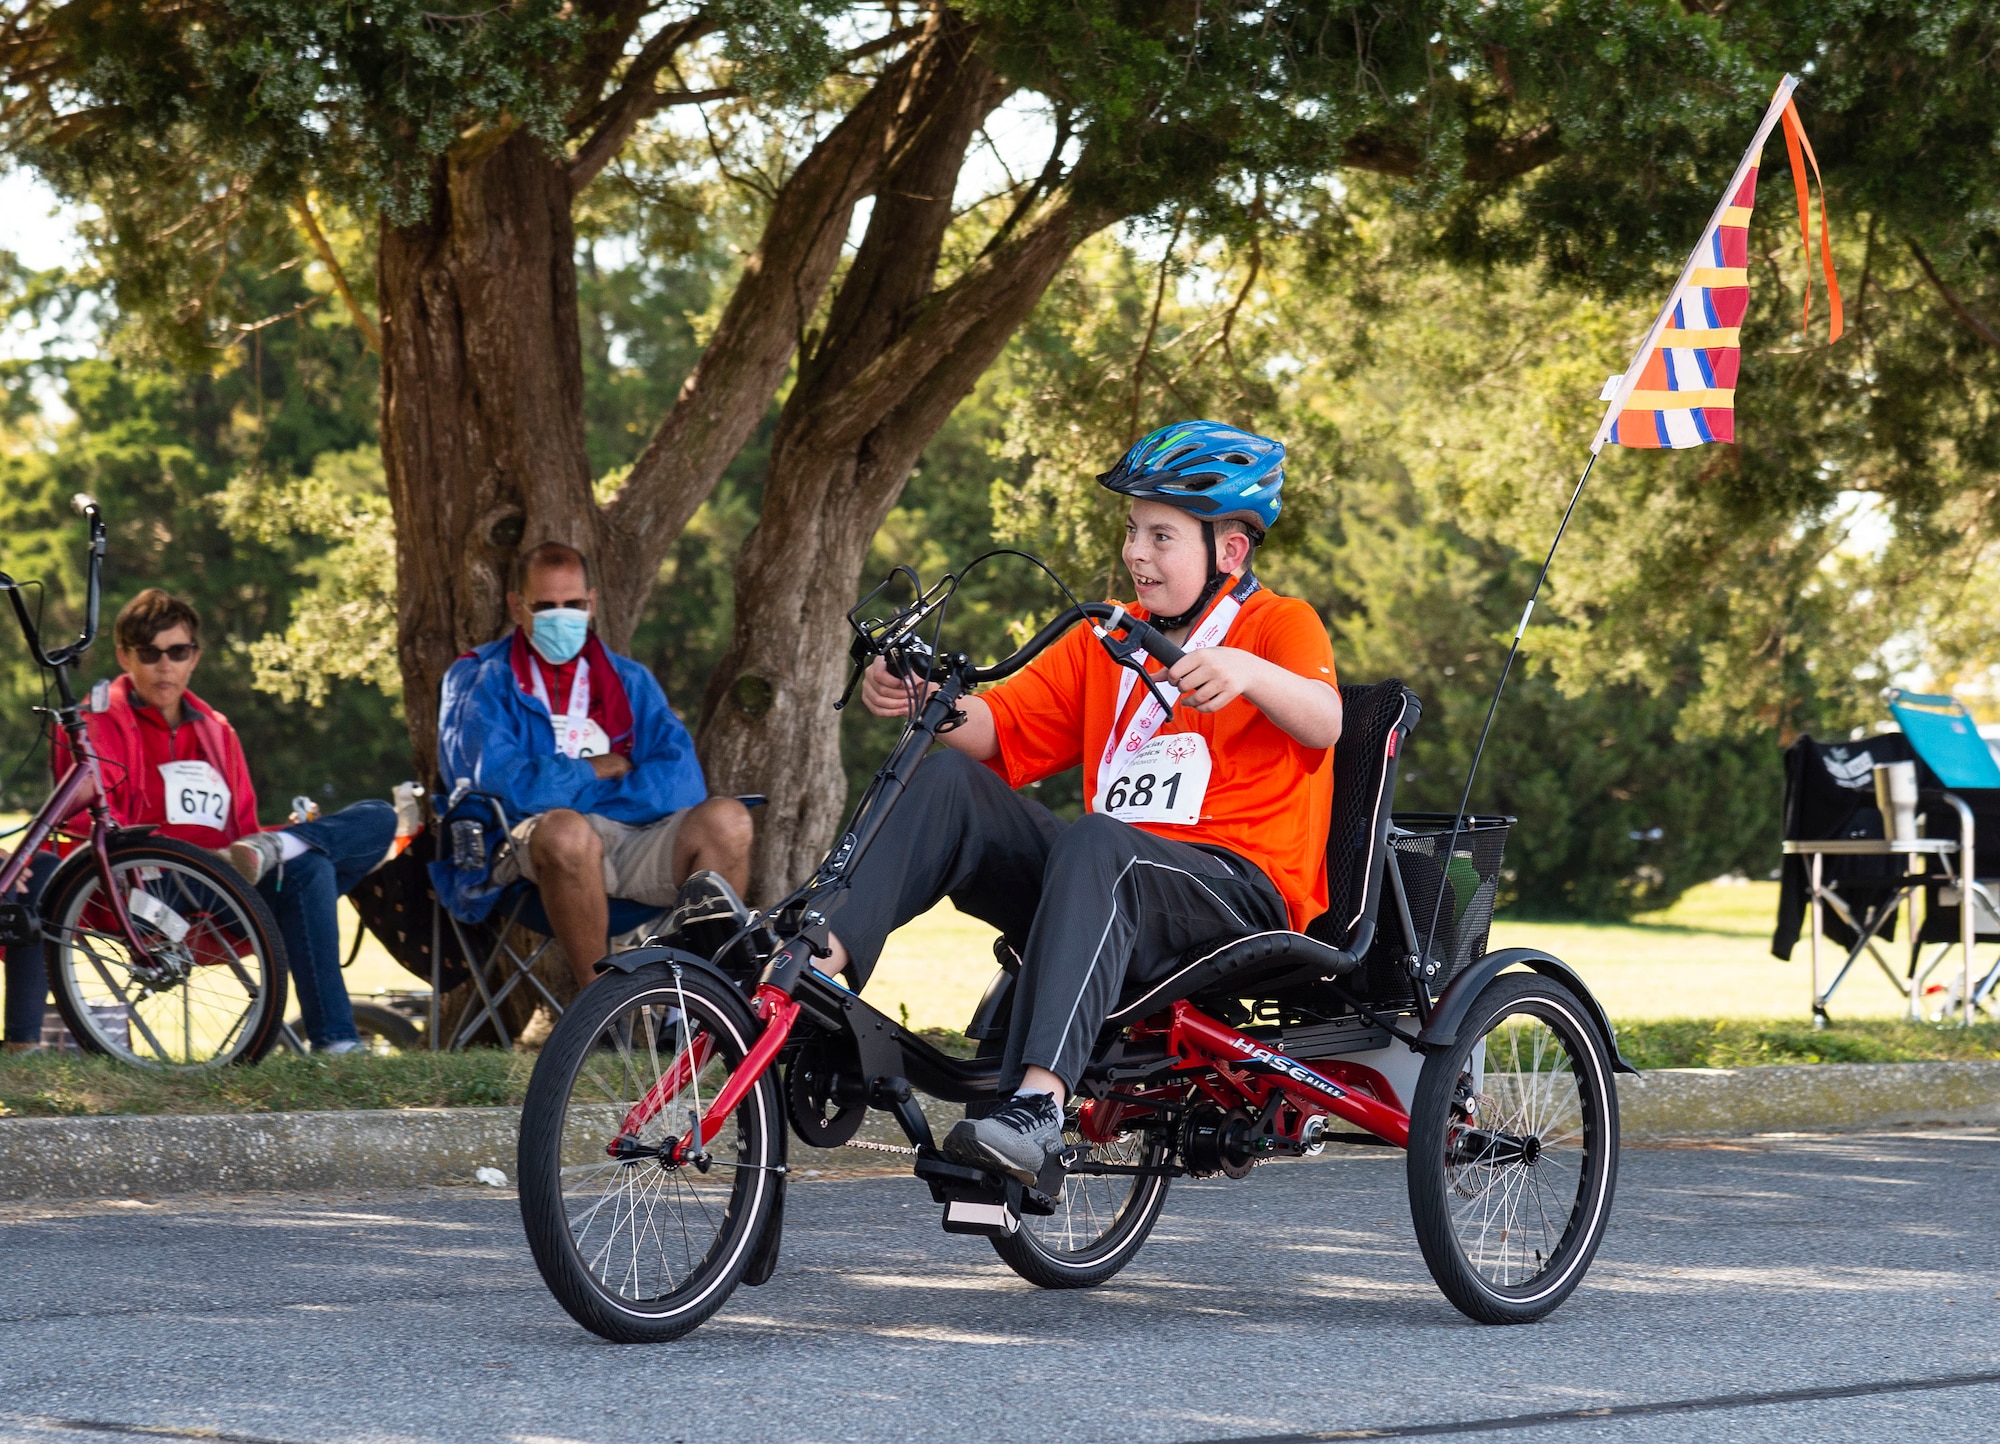 Matthew Lavelle, of the Wilmington Wizards, pedals his way to the finish line at the 2021 Special Olympics Delaware Cycling Classic at Dover Air Force Base, Delaware, Oct. 2, 2021. Lavelle competed in the 1K and 2K tricycle races. (U.S. Air Force photo by Roland Balik)